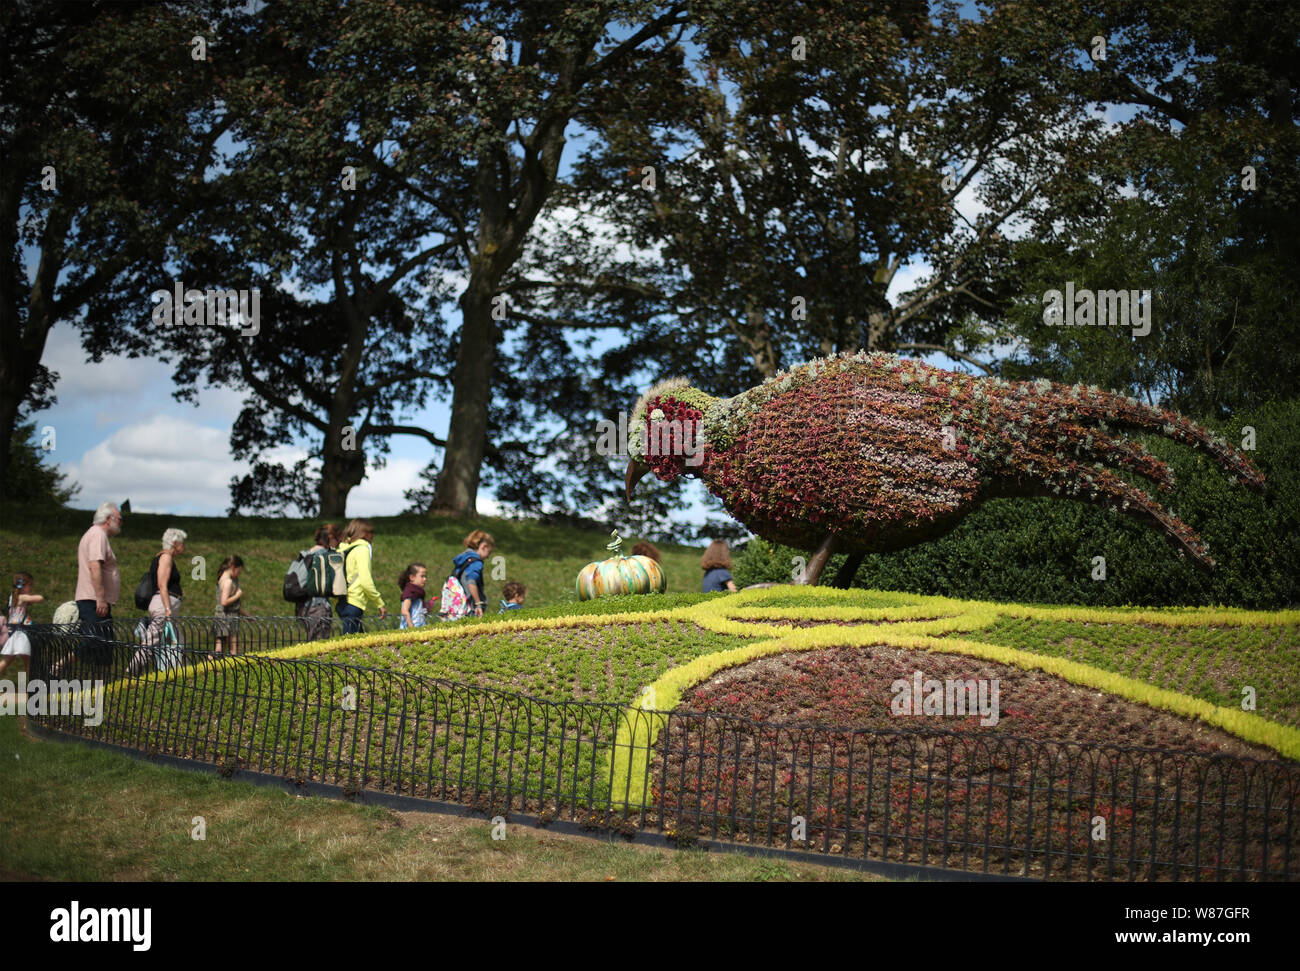 Visitors walk past a giant bird sculpture made of plants, at Waddesdon Manor, Buckinghamshire. Stock Photo